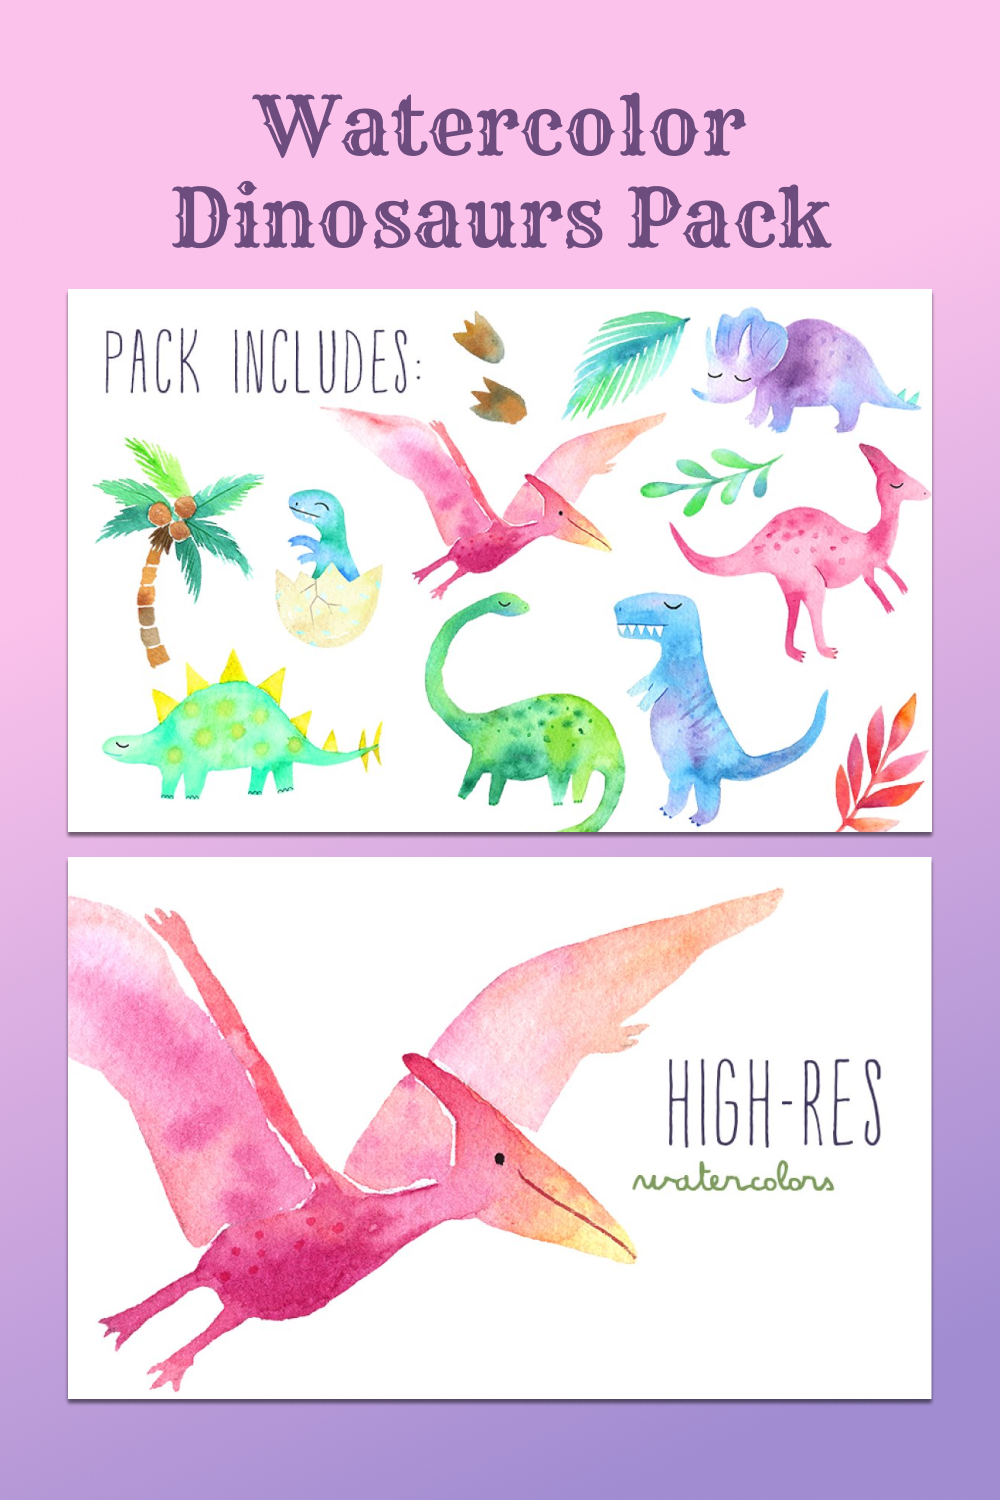 watercolor dinosaurs hand painted pack.